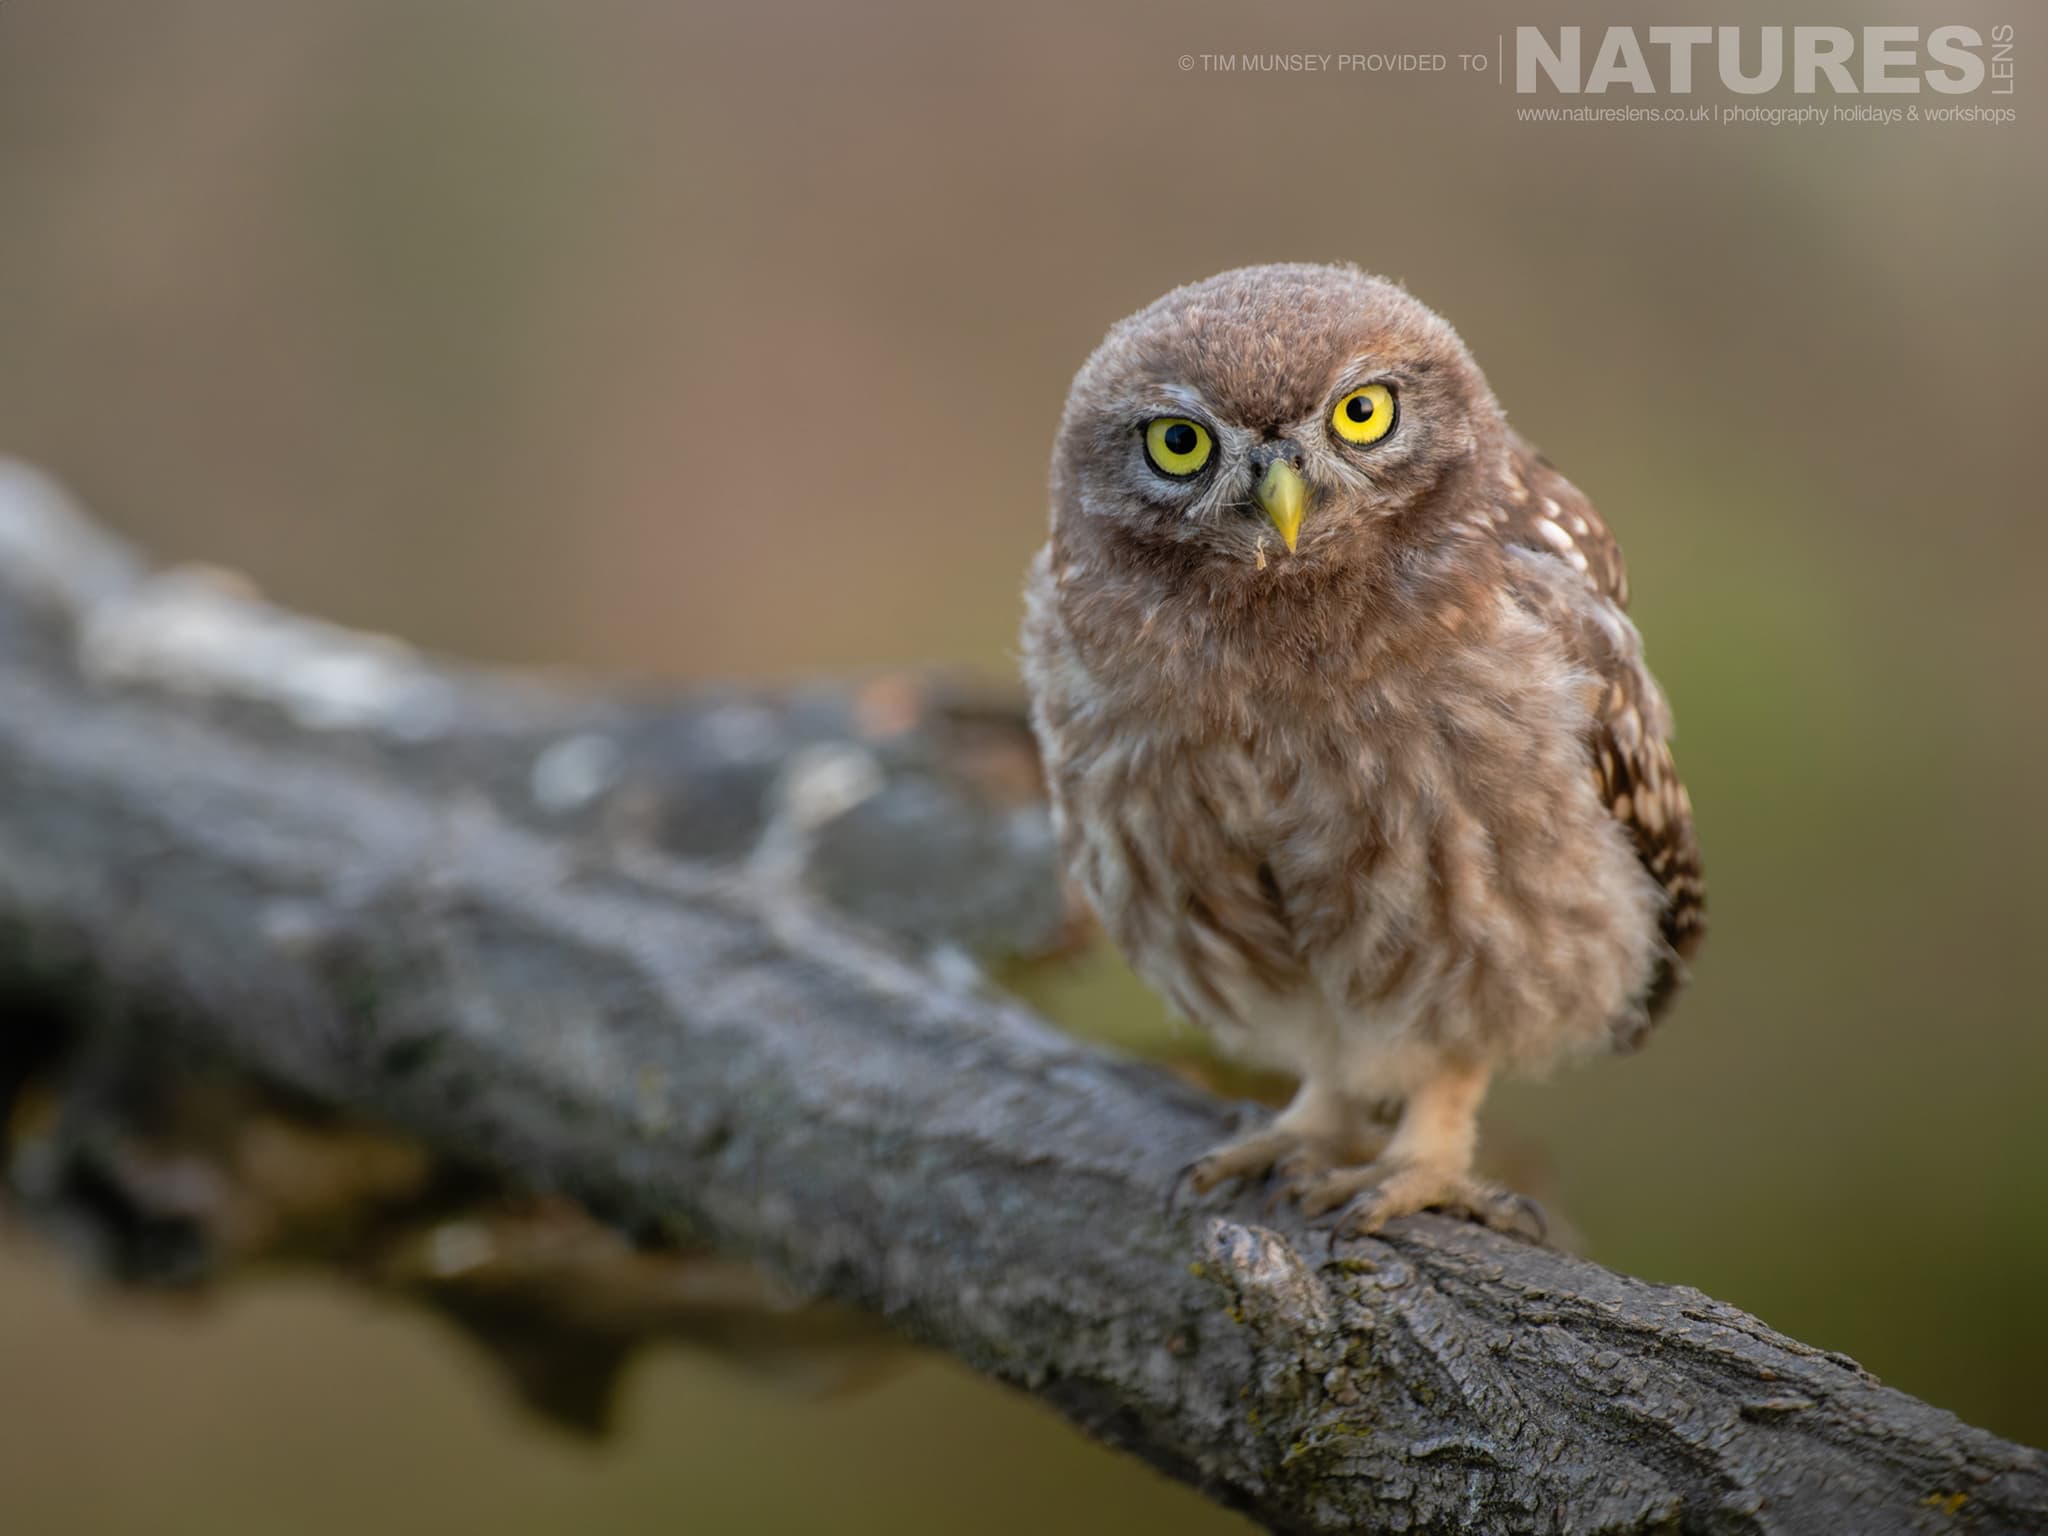 A Little Owl perched on a branch - photographed at Bence Máté's hides in Hungary during a NaturesLens wildlife photography holiday